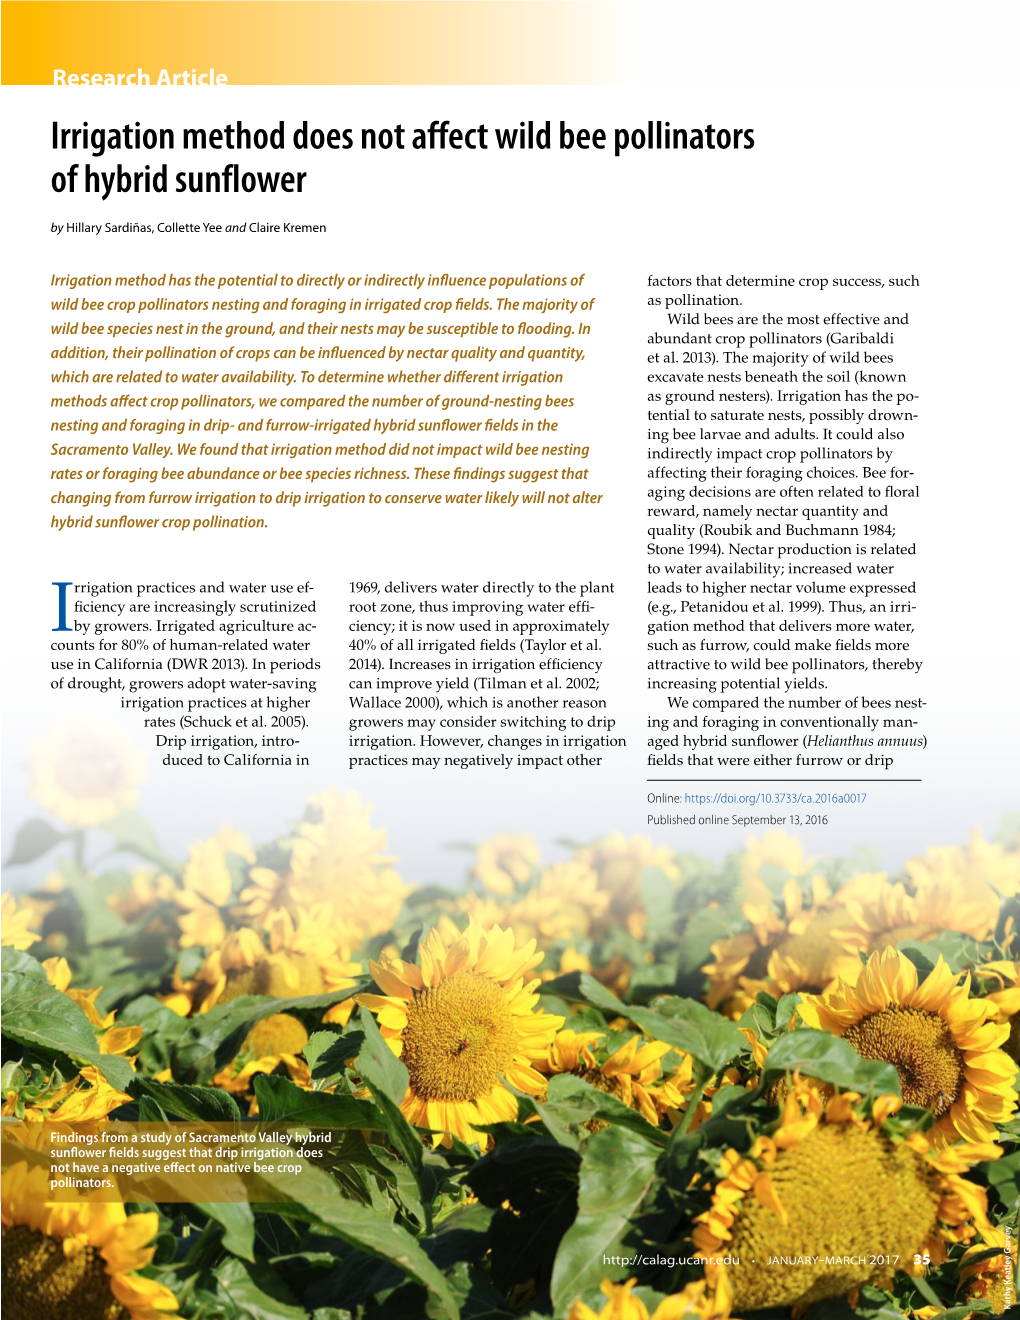 Irrigation Method Does Not Affect Wild Bee Pollinators of Hybrid Sunflower by Hillary Sardiñas, Collette Yee and Claire Kremen